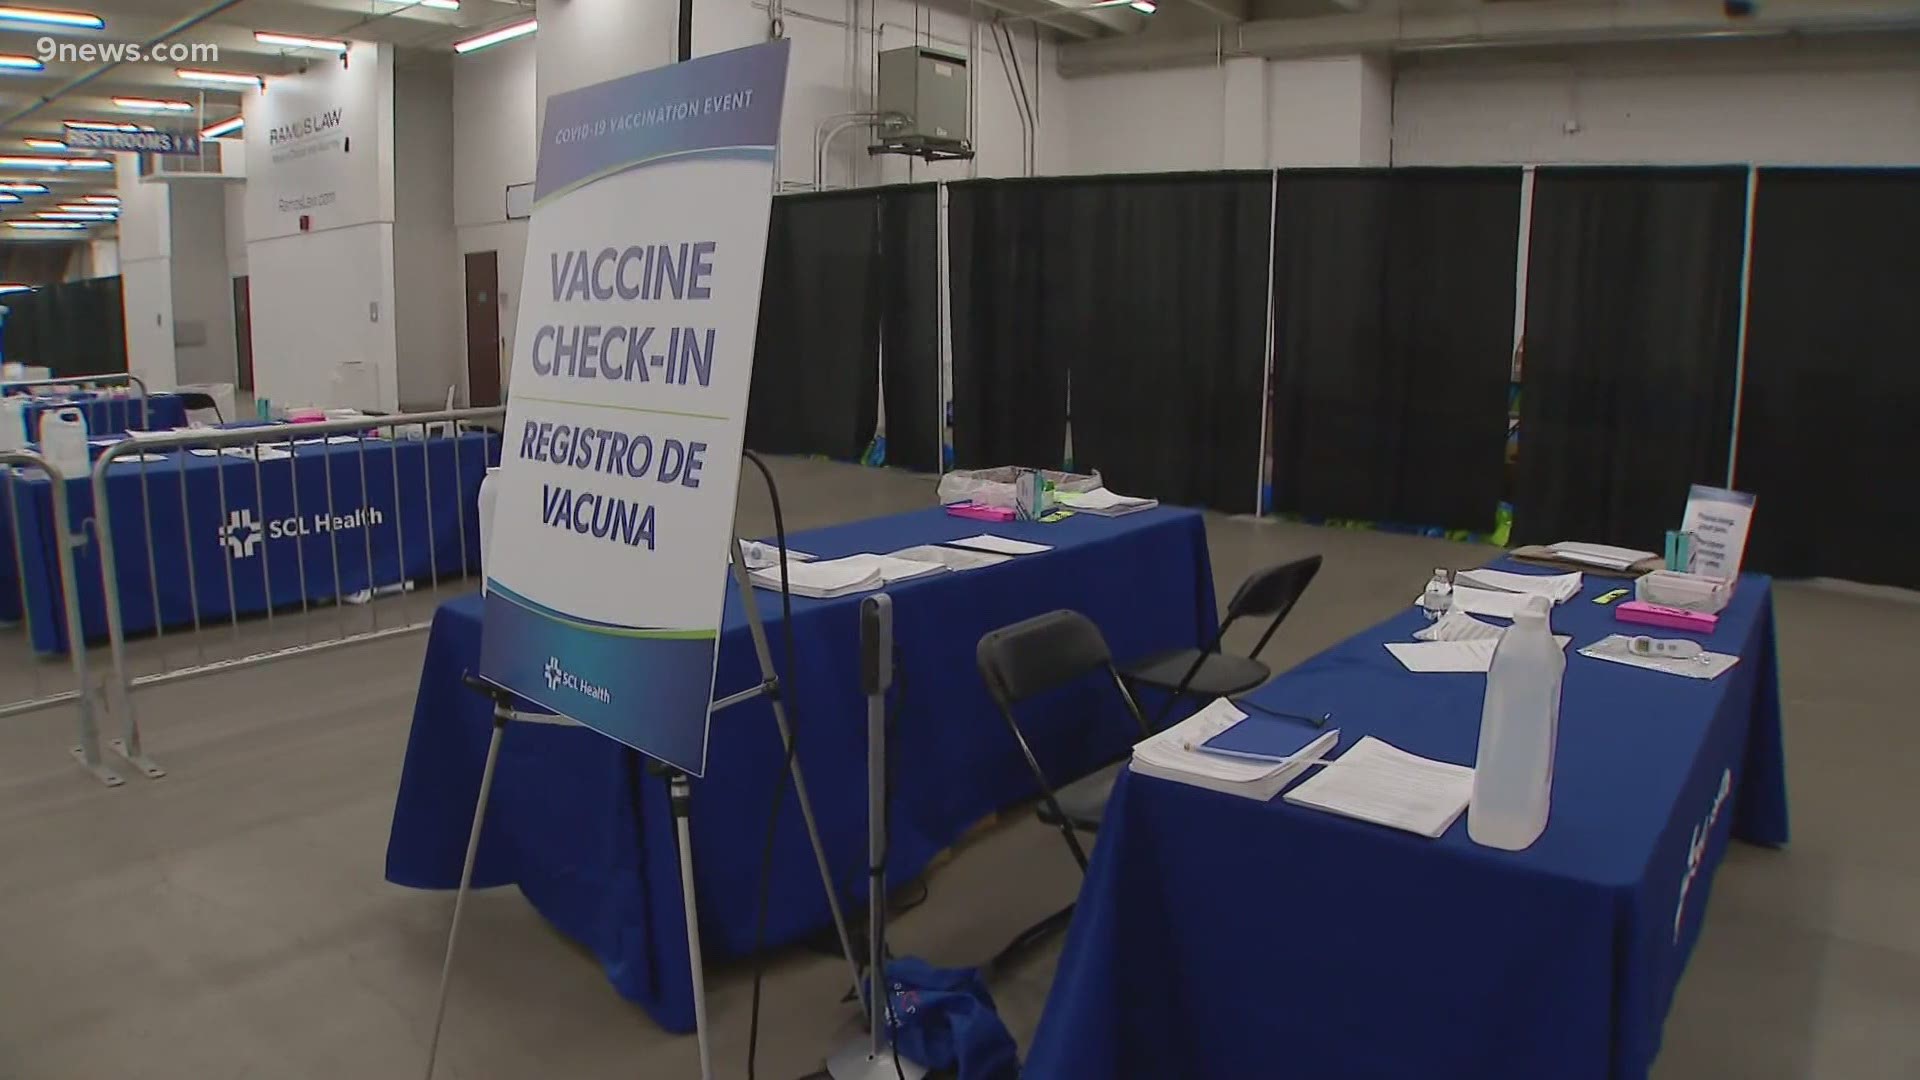 All week 9NEWS reporter Lori Lizarraga will have more on the efforts being made with state health partners to better address the growing vaccine gap.